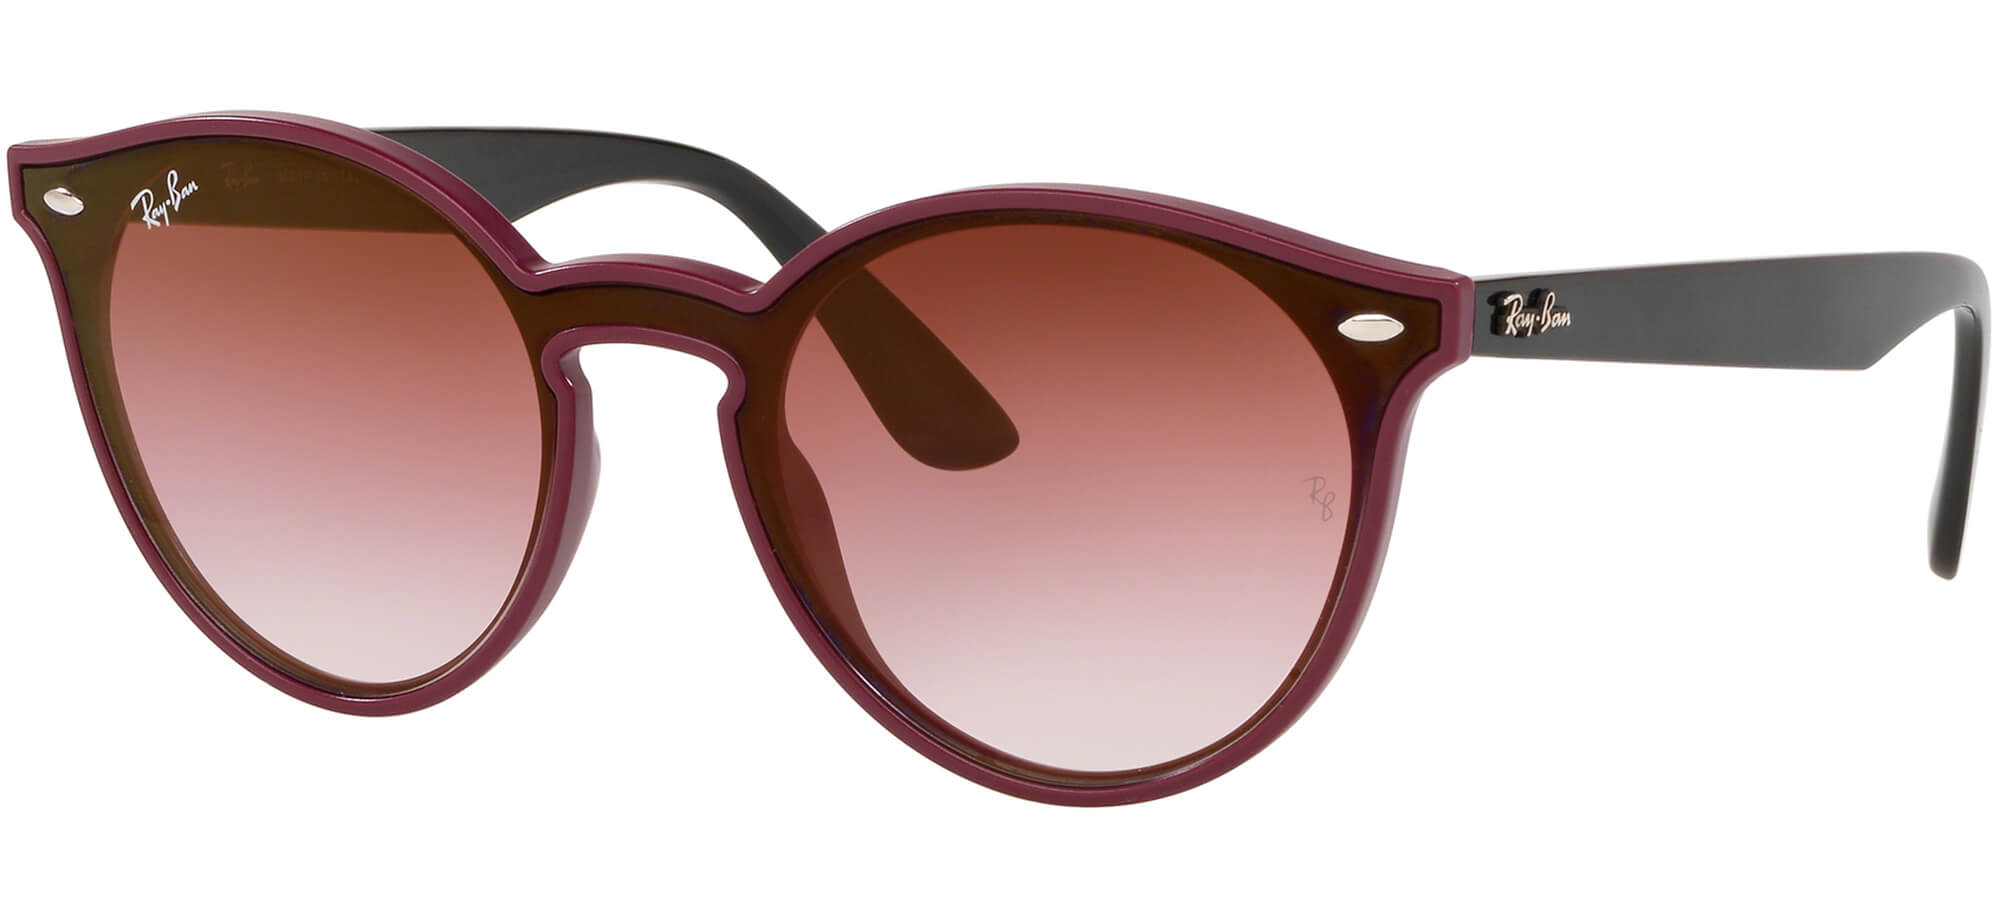 Ray-BanBLAZE RB 4380NBurgundy/red Shaded (6418/0T)